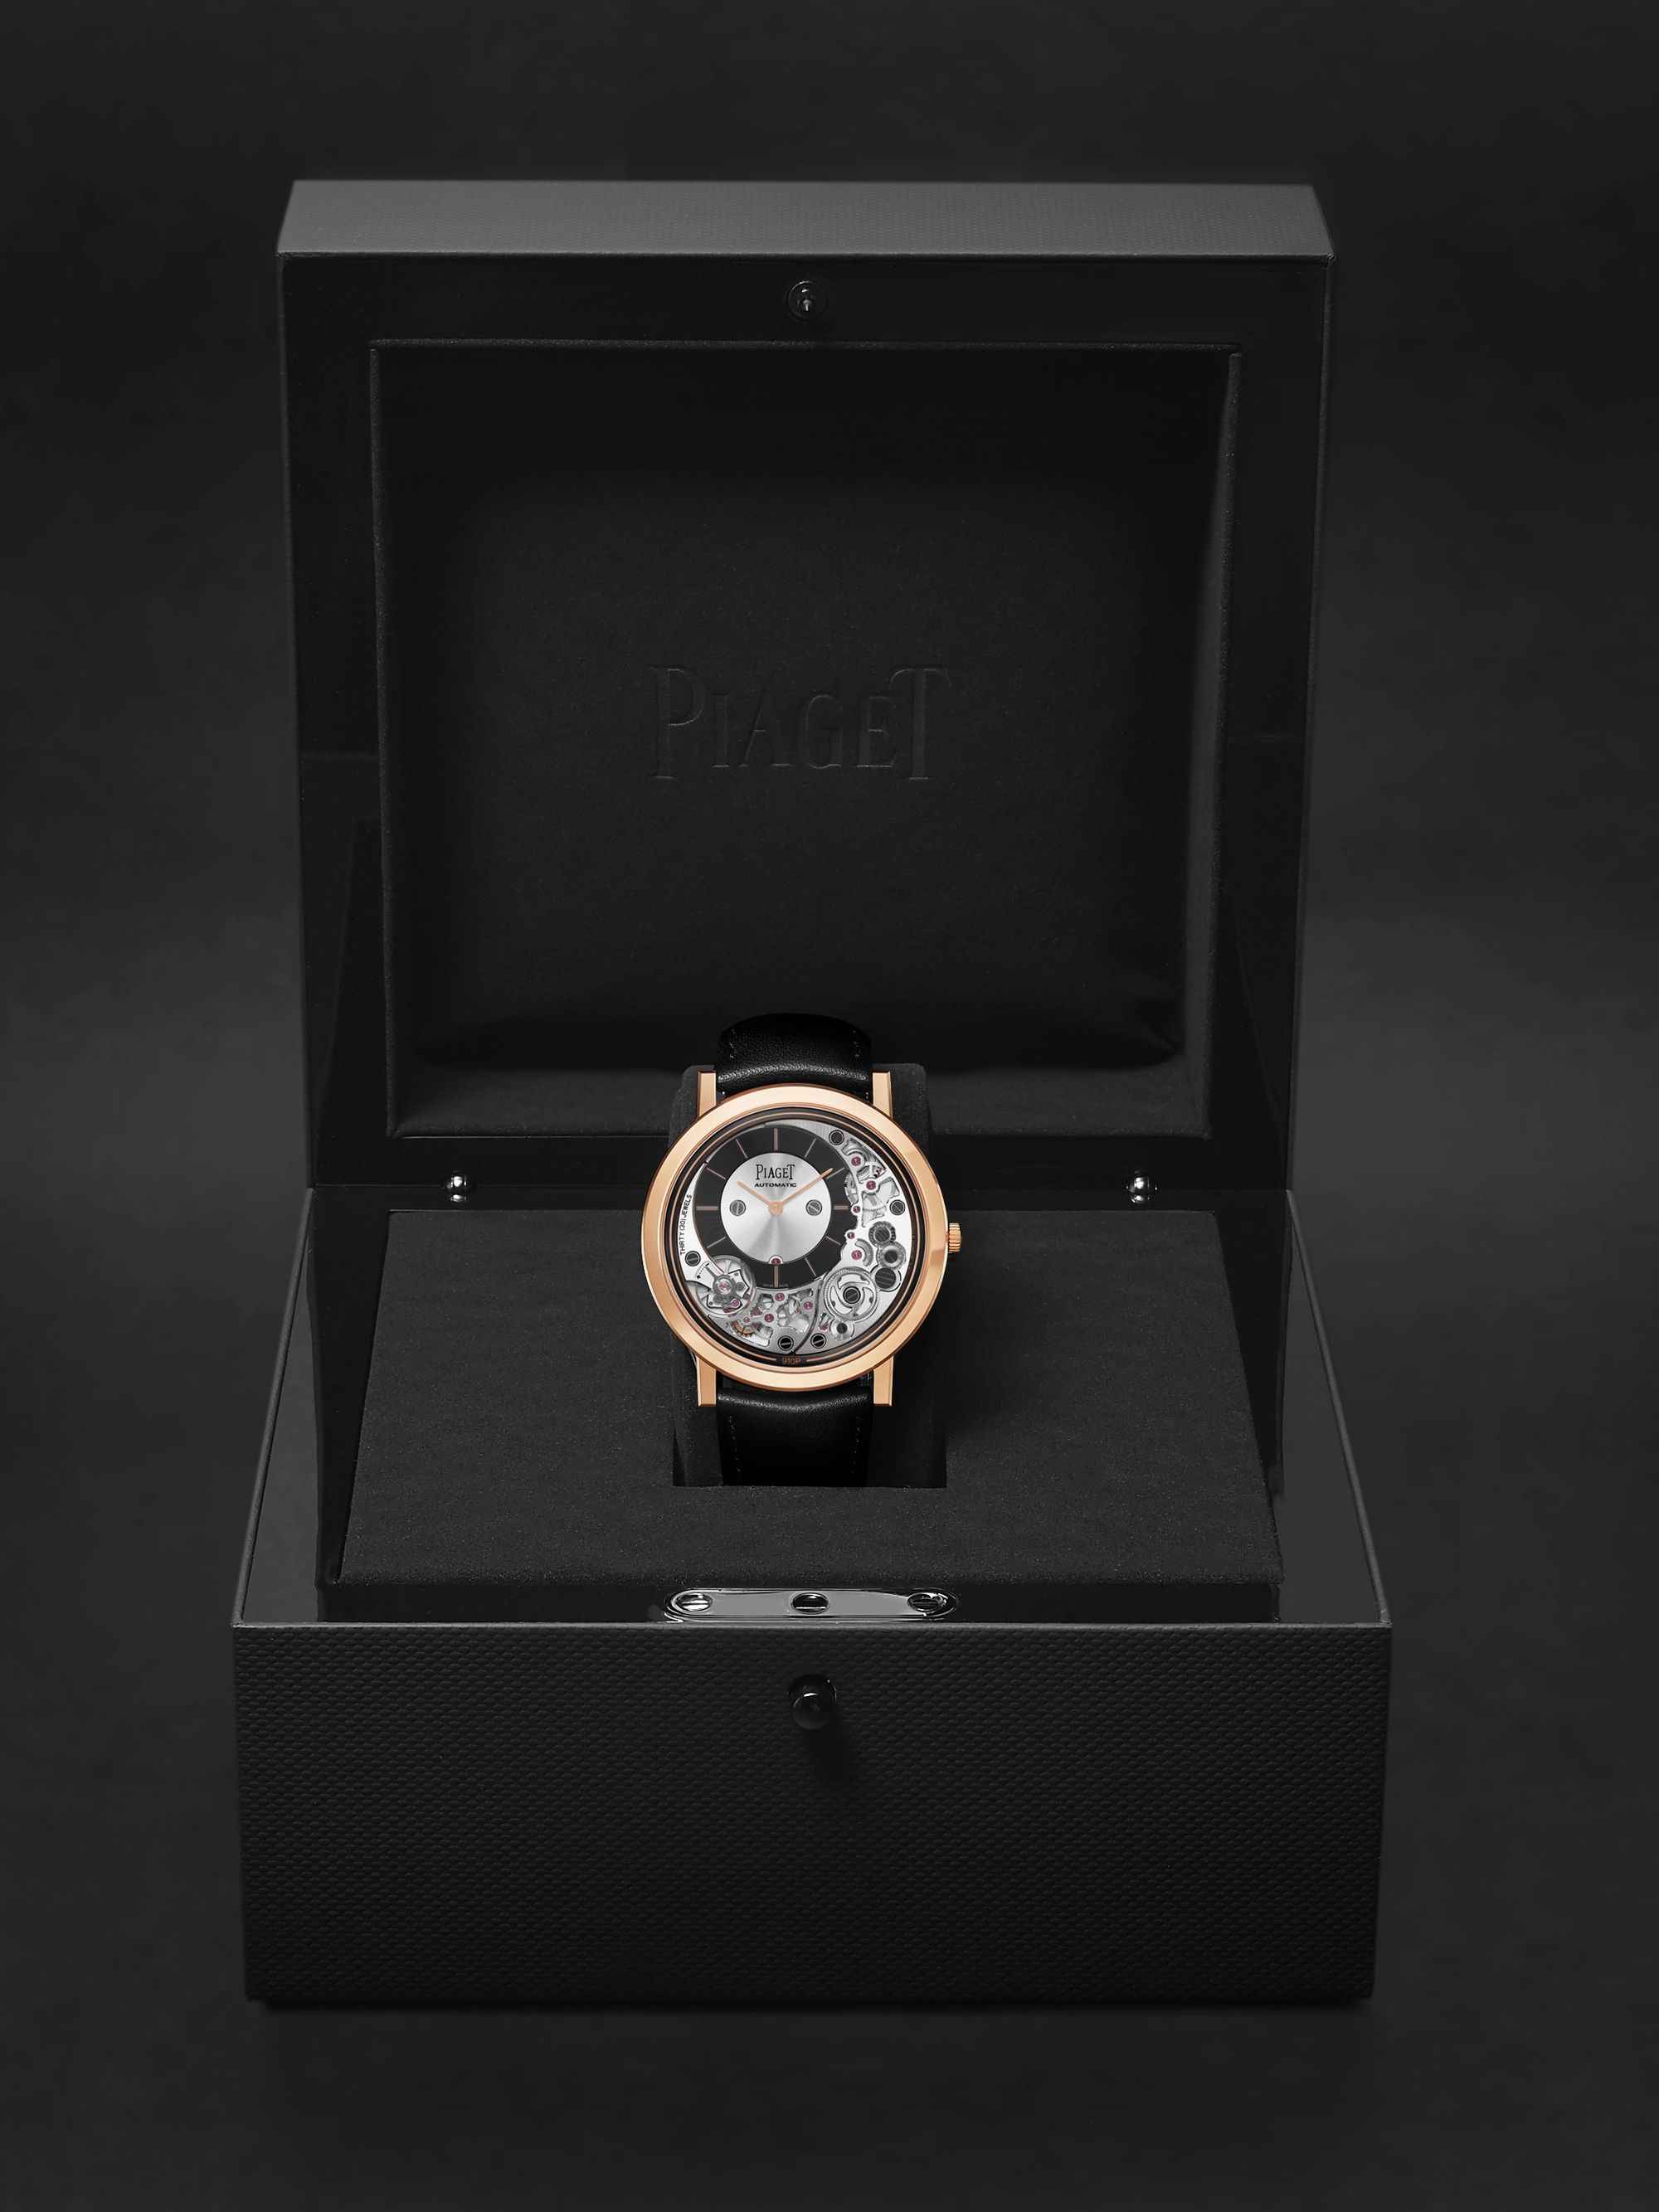 PIAGET Altiplano Ultimate Automatic 41mm 18-Karat Rose Gold and Leather Watch, Ref. No. G0B43120